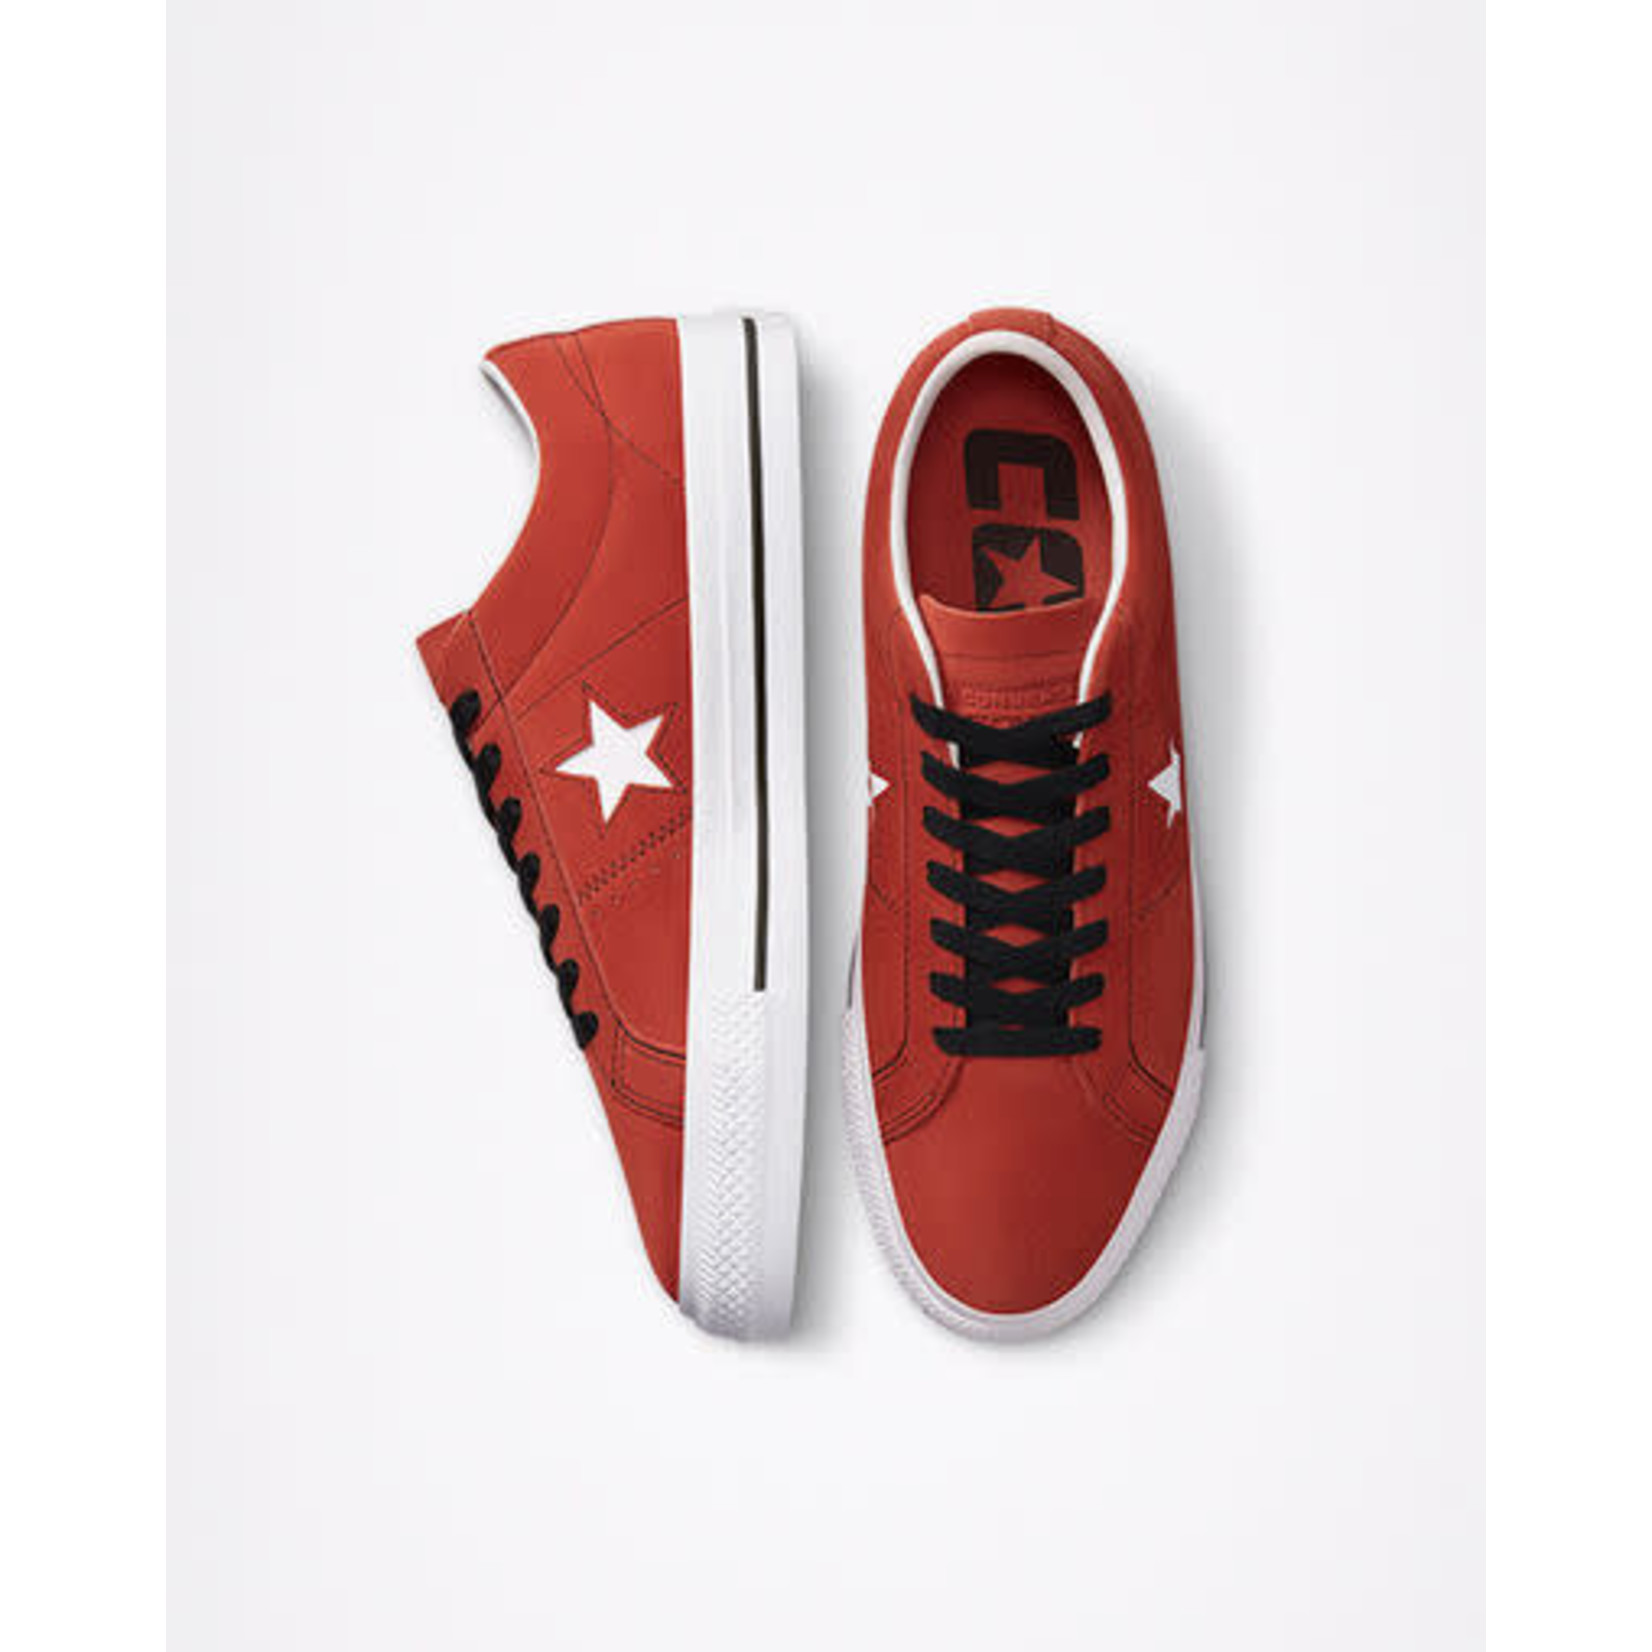 Converse Cons Converse CONS One Star Pro Suede (Fire Opal/Black/White)